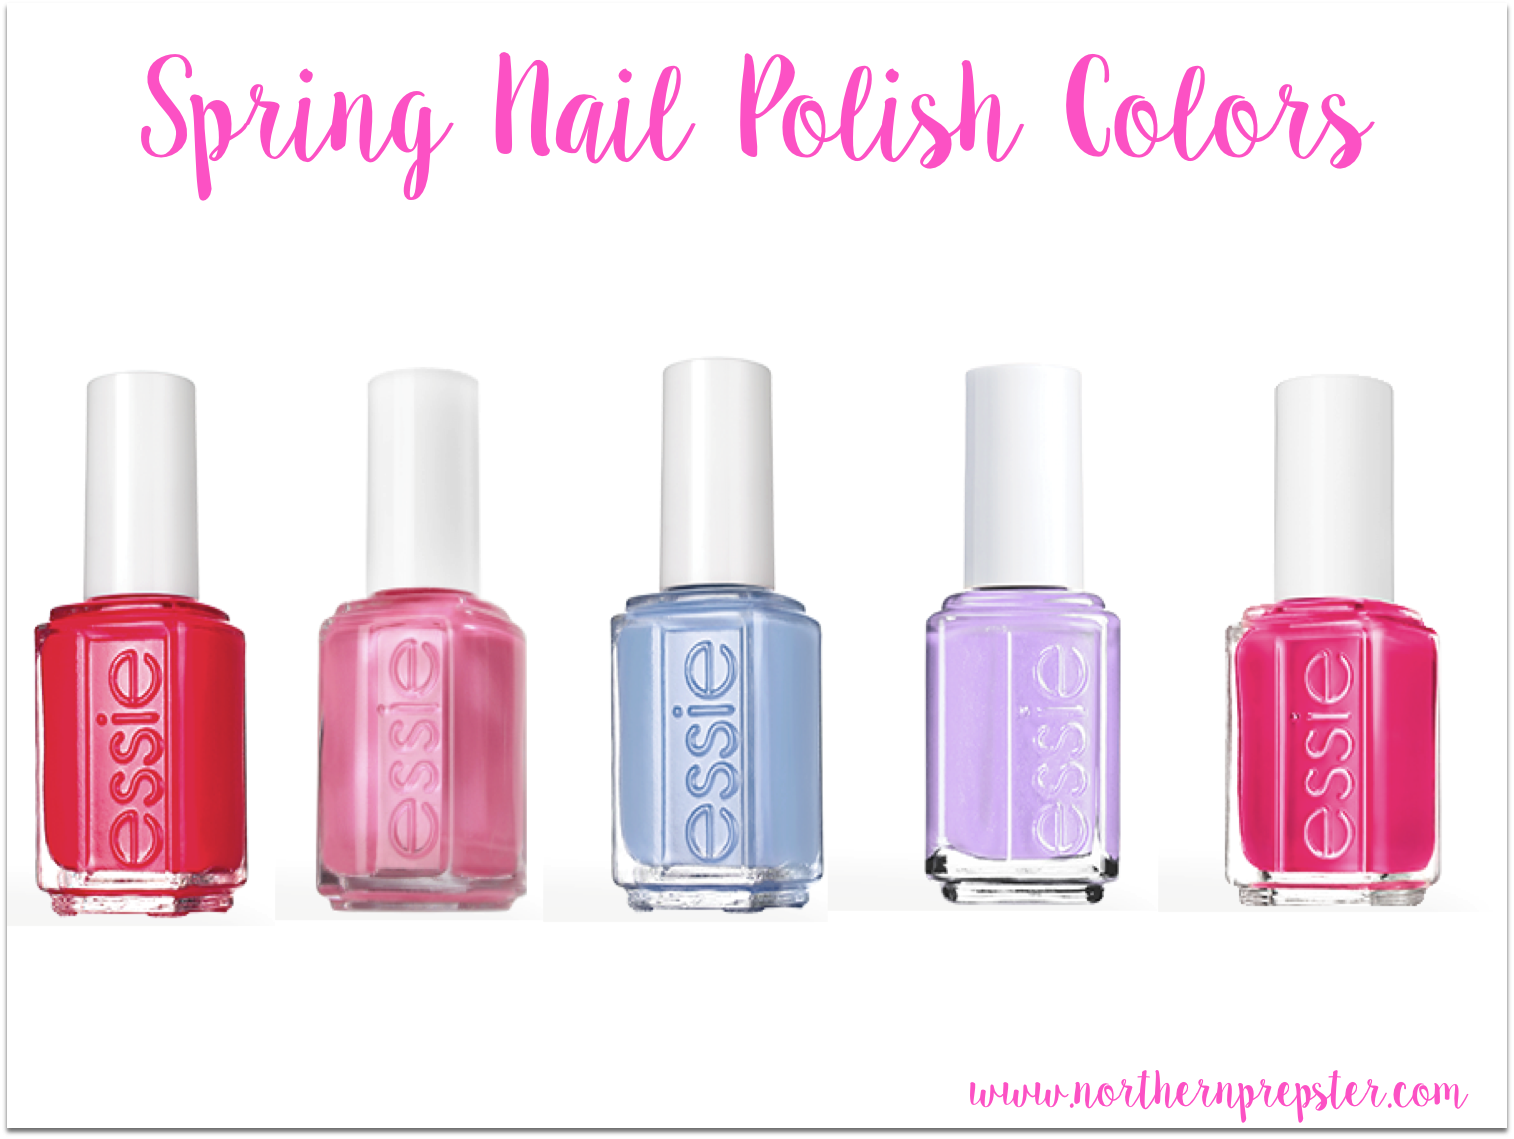 7. "Fresh and Fun: The Latest Pastel Nail Polish Colors for Spring" - wide 3